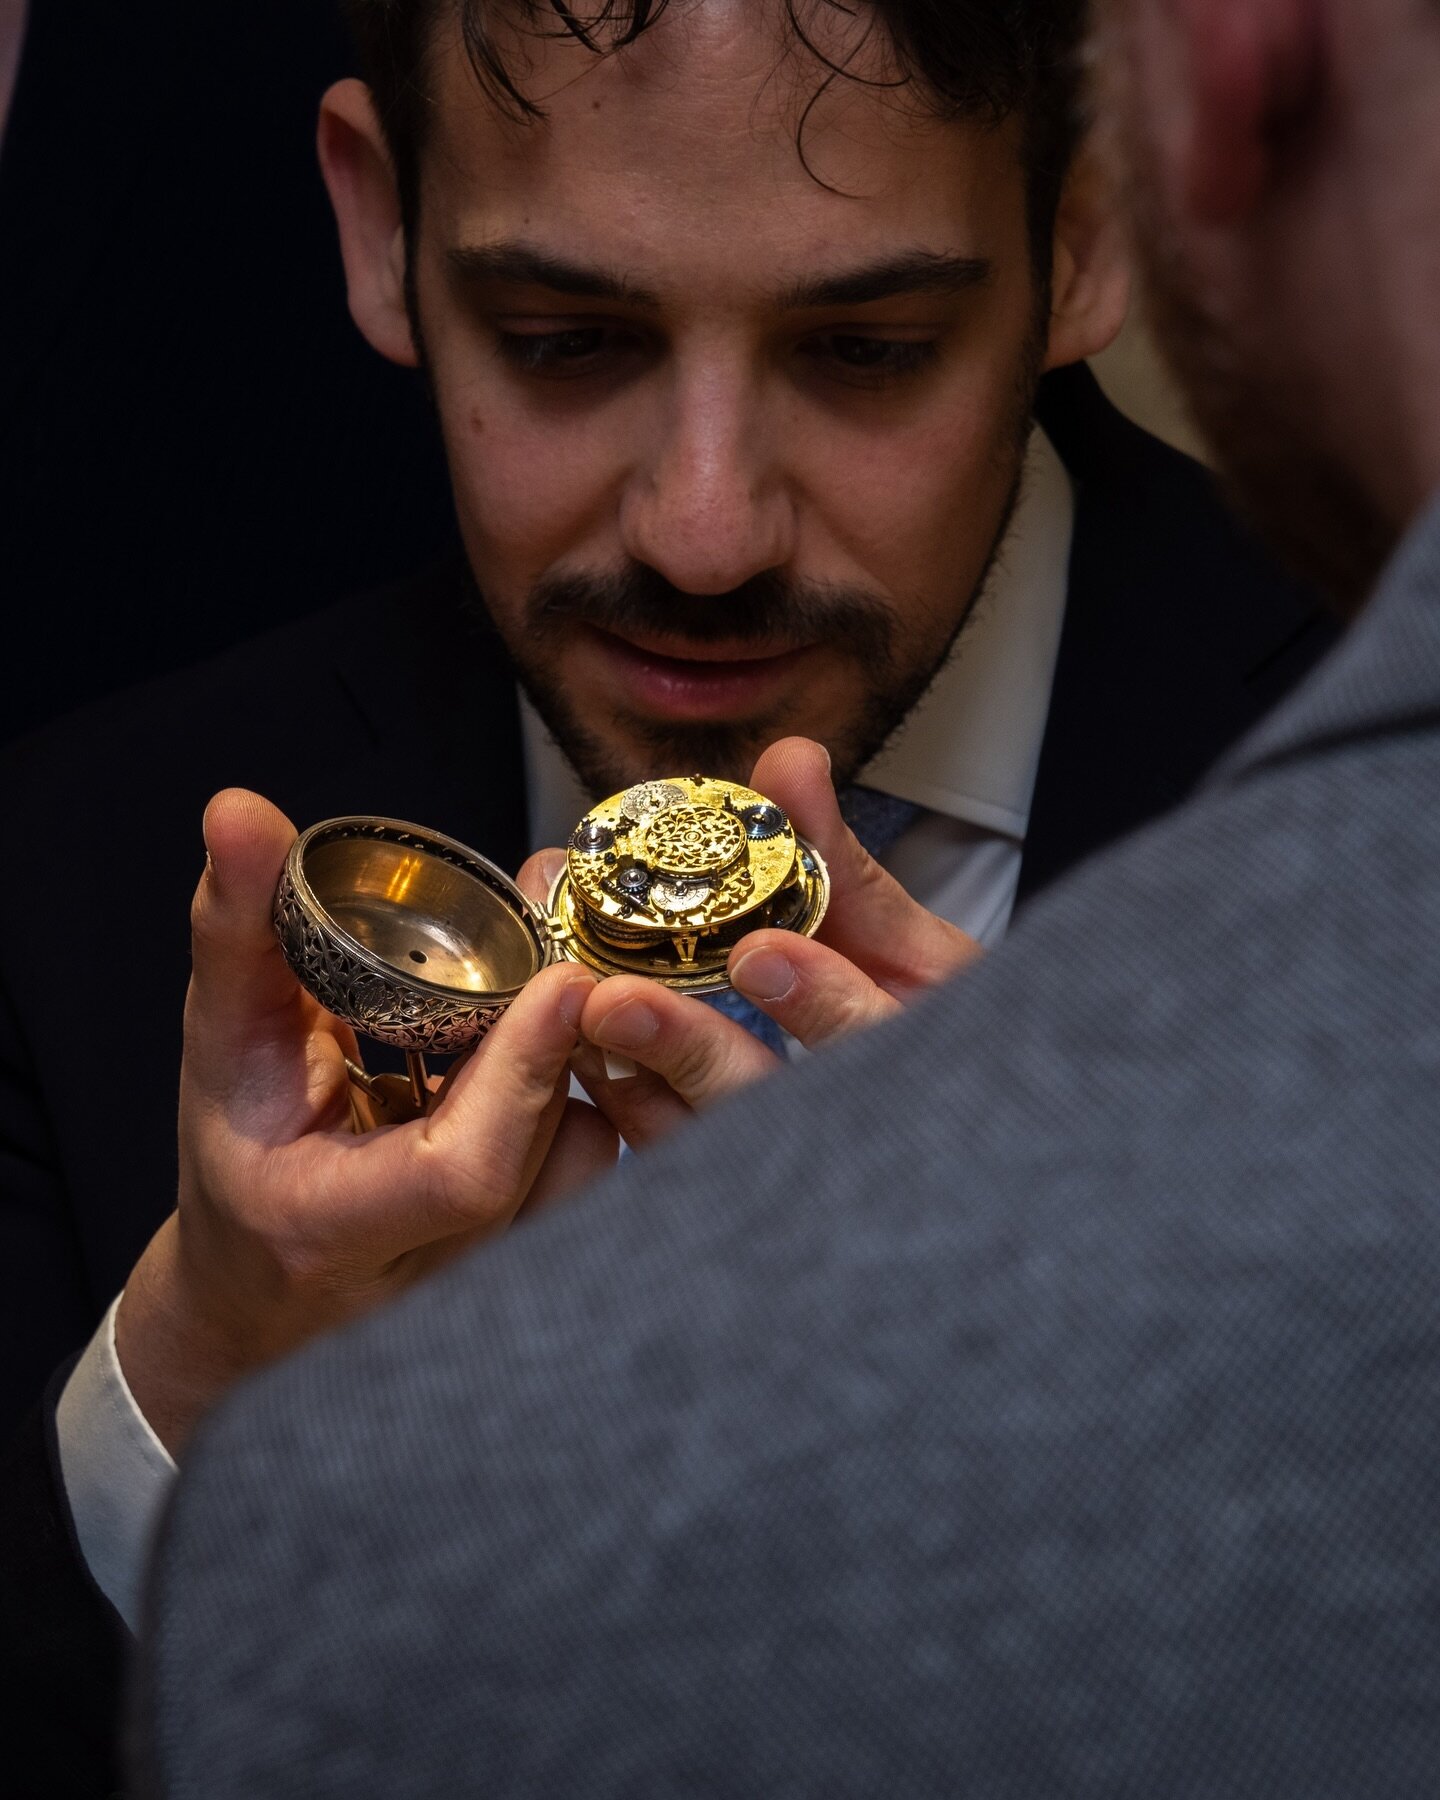 Getting around to sharing some pics from recent events. Here&rsquo;s one @somlo_london with Daniel sharing some early pocket watches. Certainly not to my usual taste, but this picture highlights the passion that we all have and that the term &ldquo;W